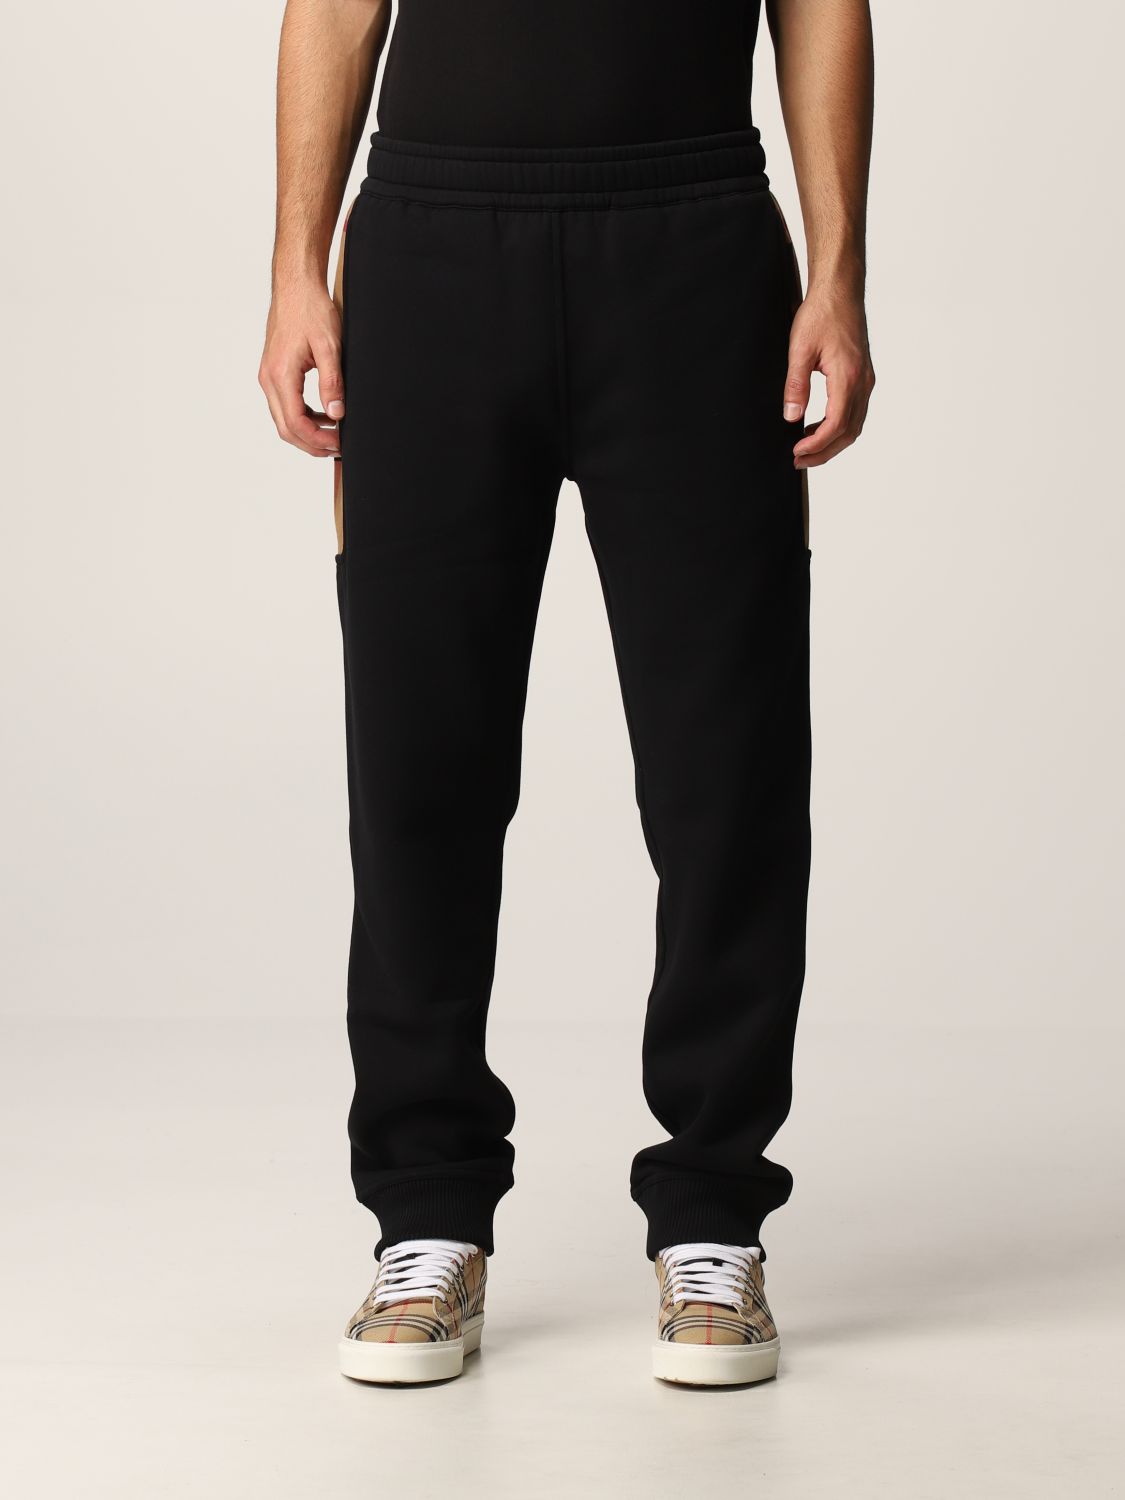 BURBERRY: pants for man - Black | Burberry pants 8045013 online on ...